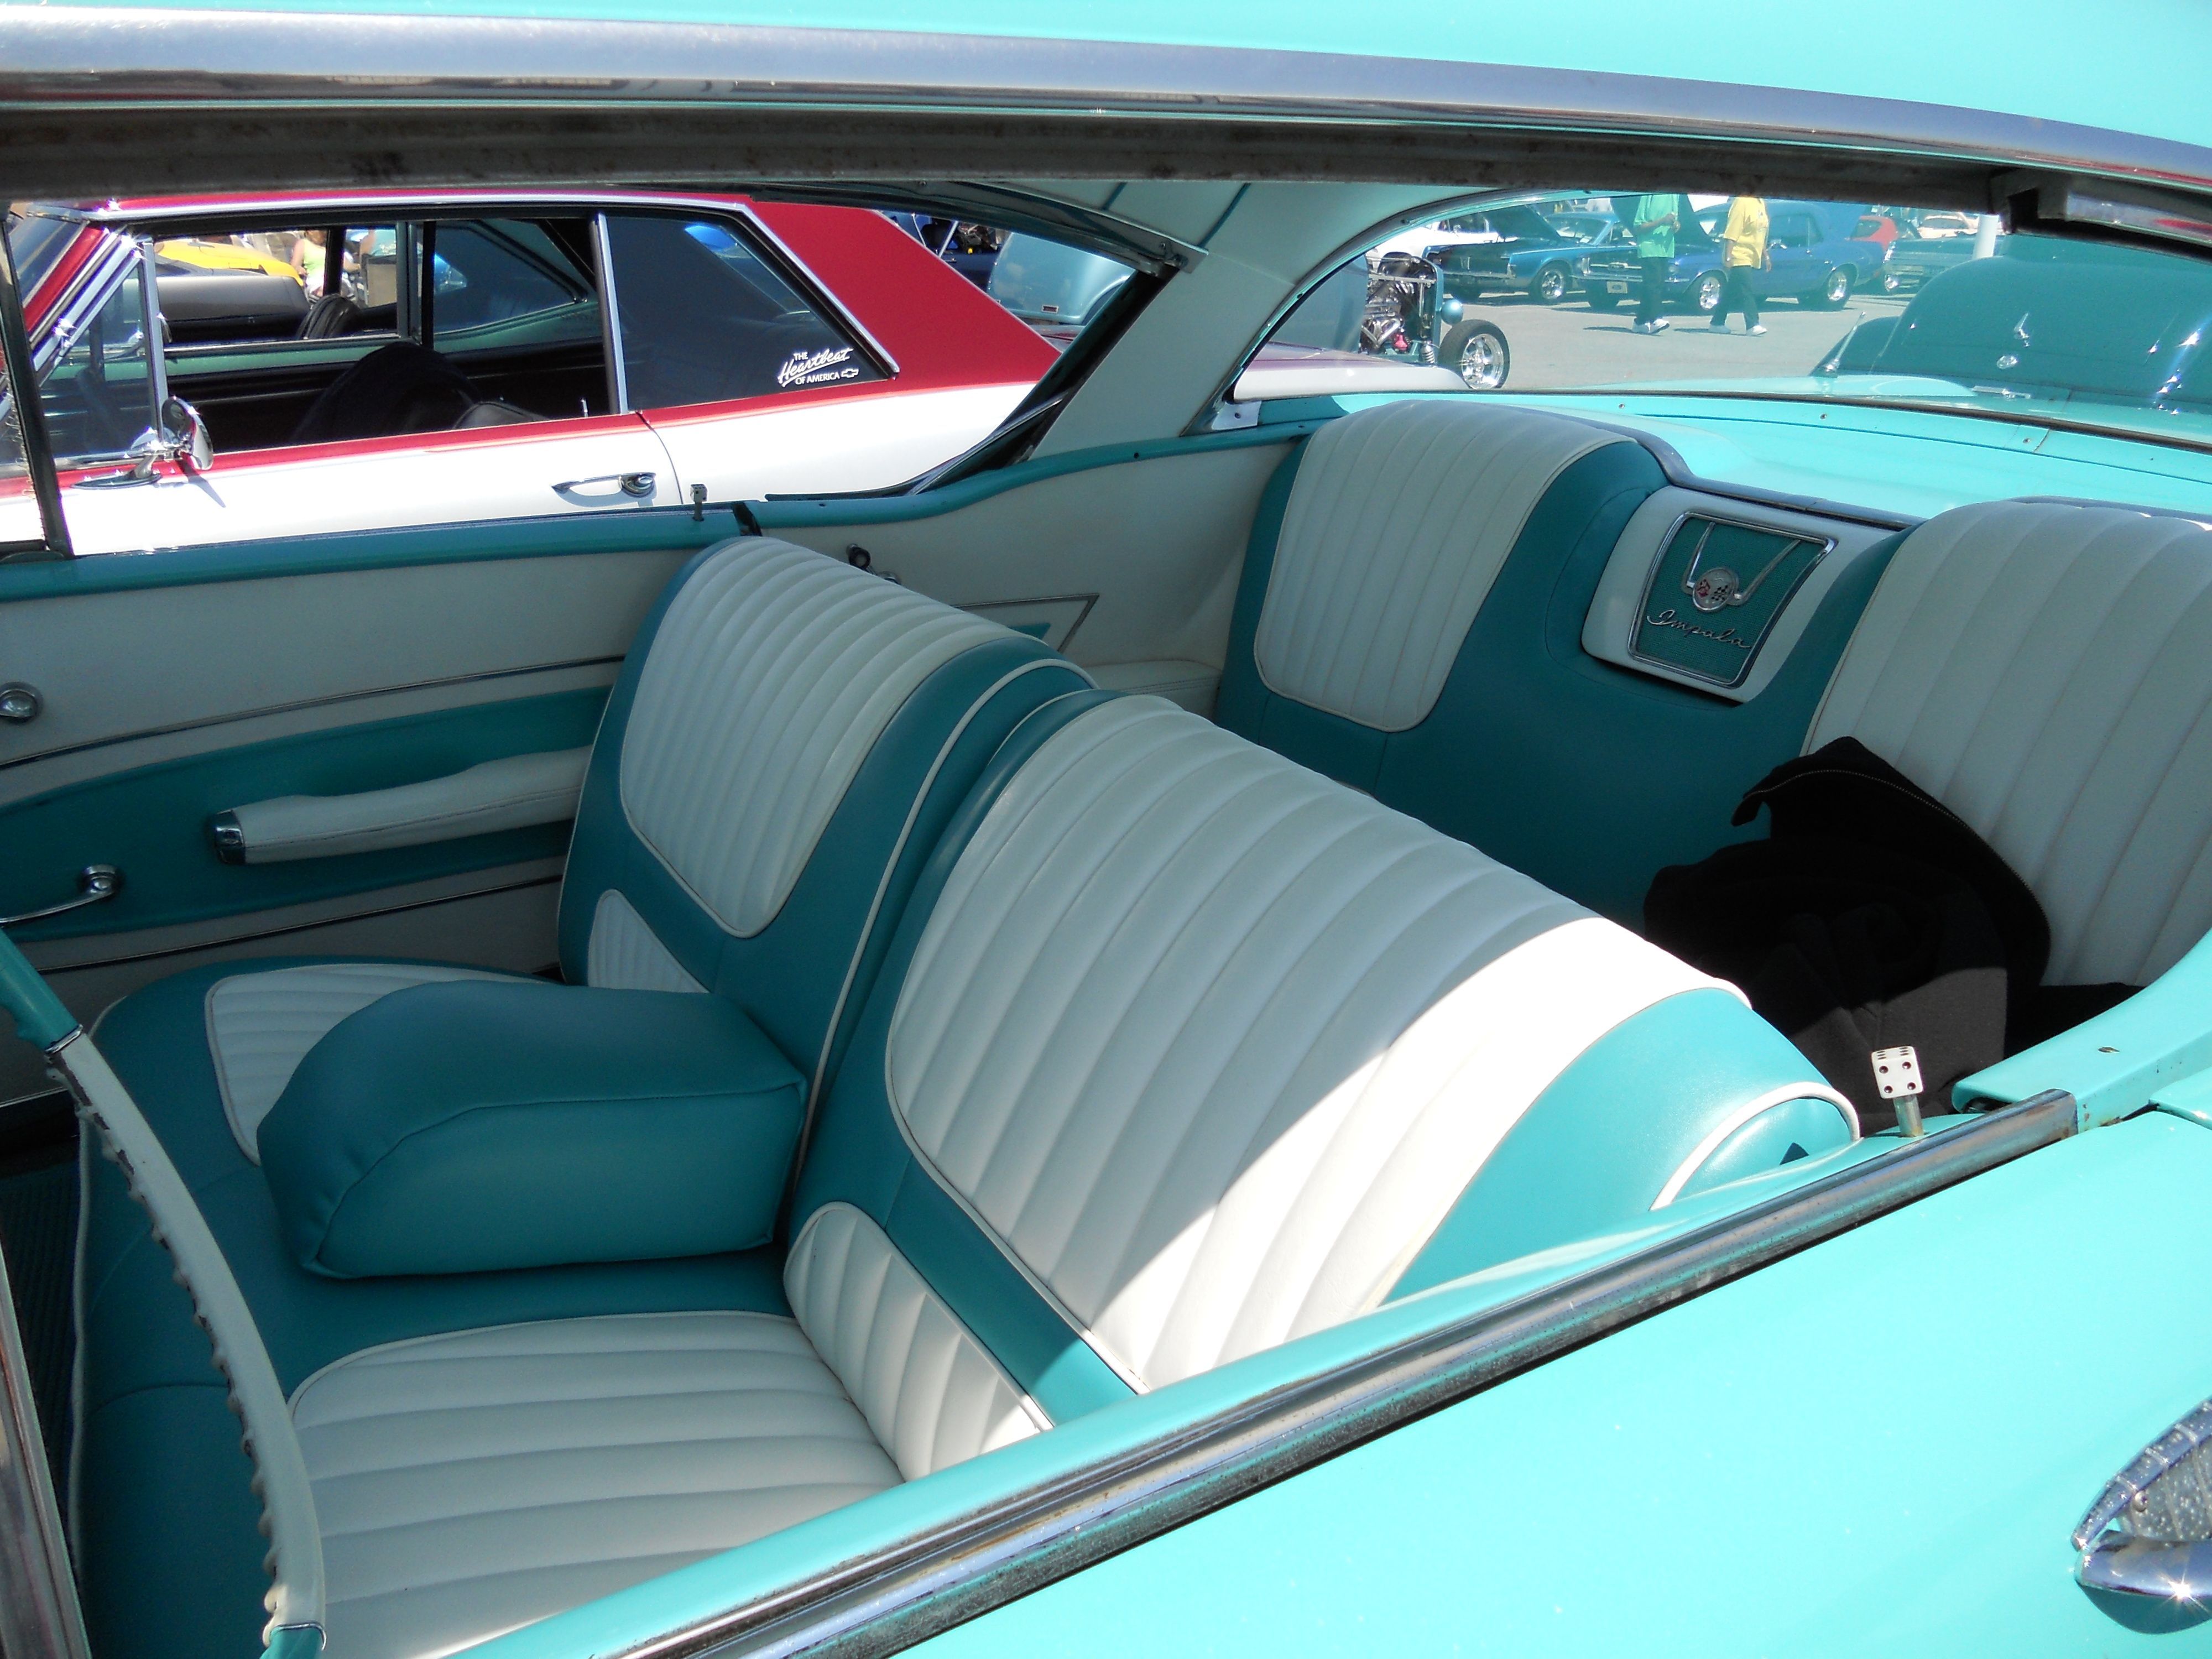 Teal and white interior